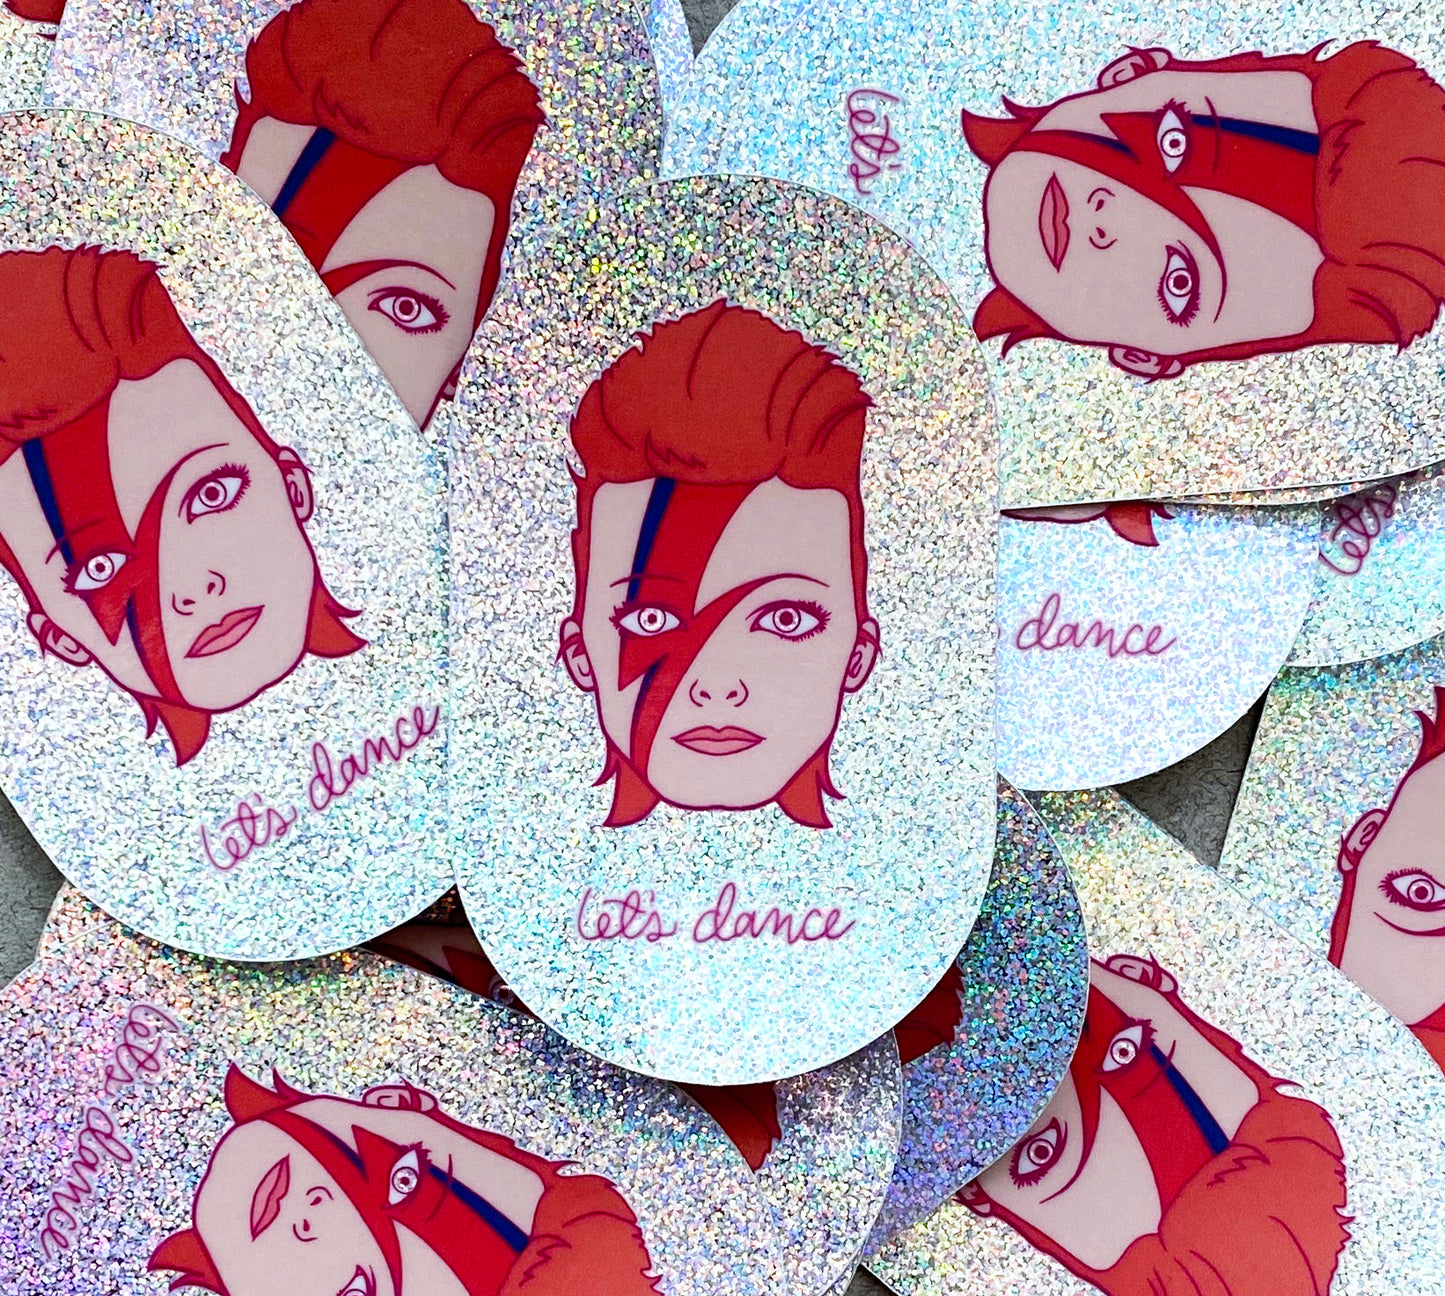 A pile of stickers featuring an illustration of David Bowie's head with the phrase "let's dance" on irridescent glitter vinyl. 